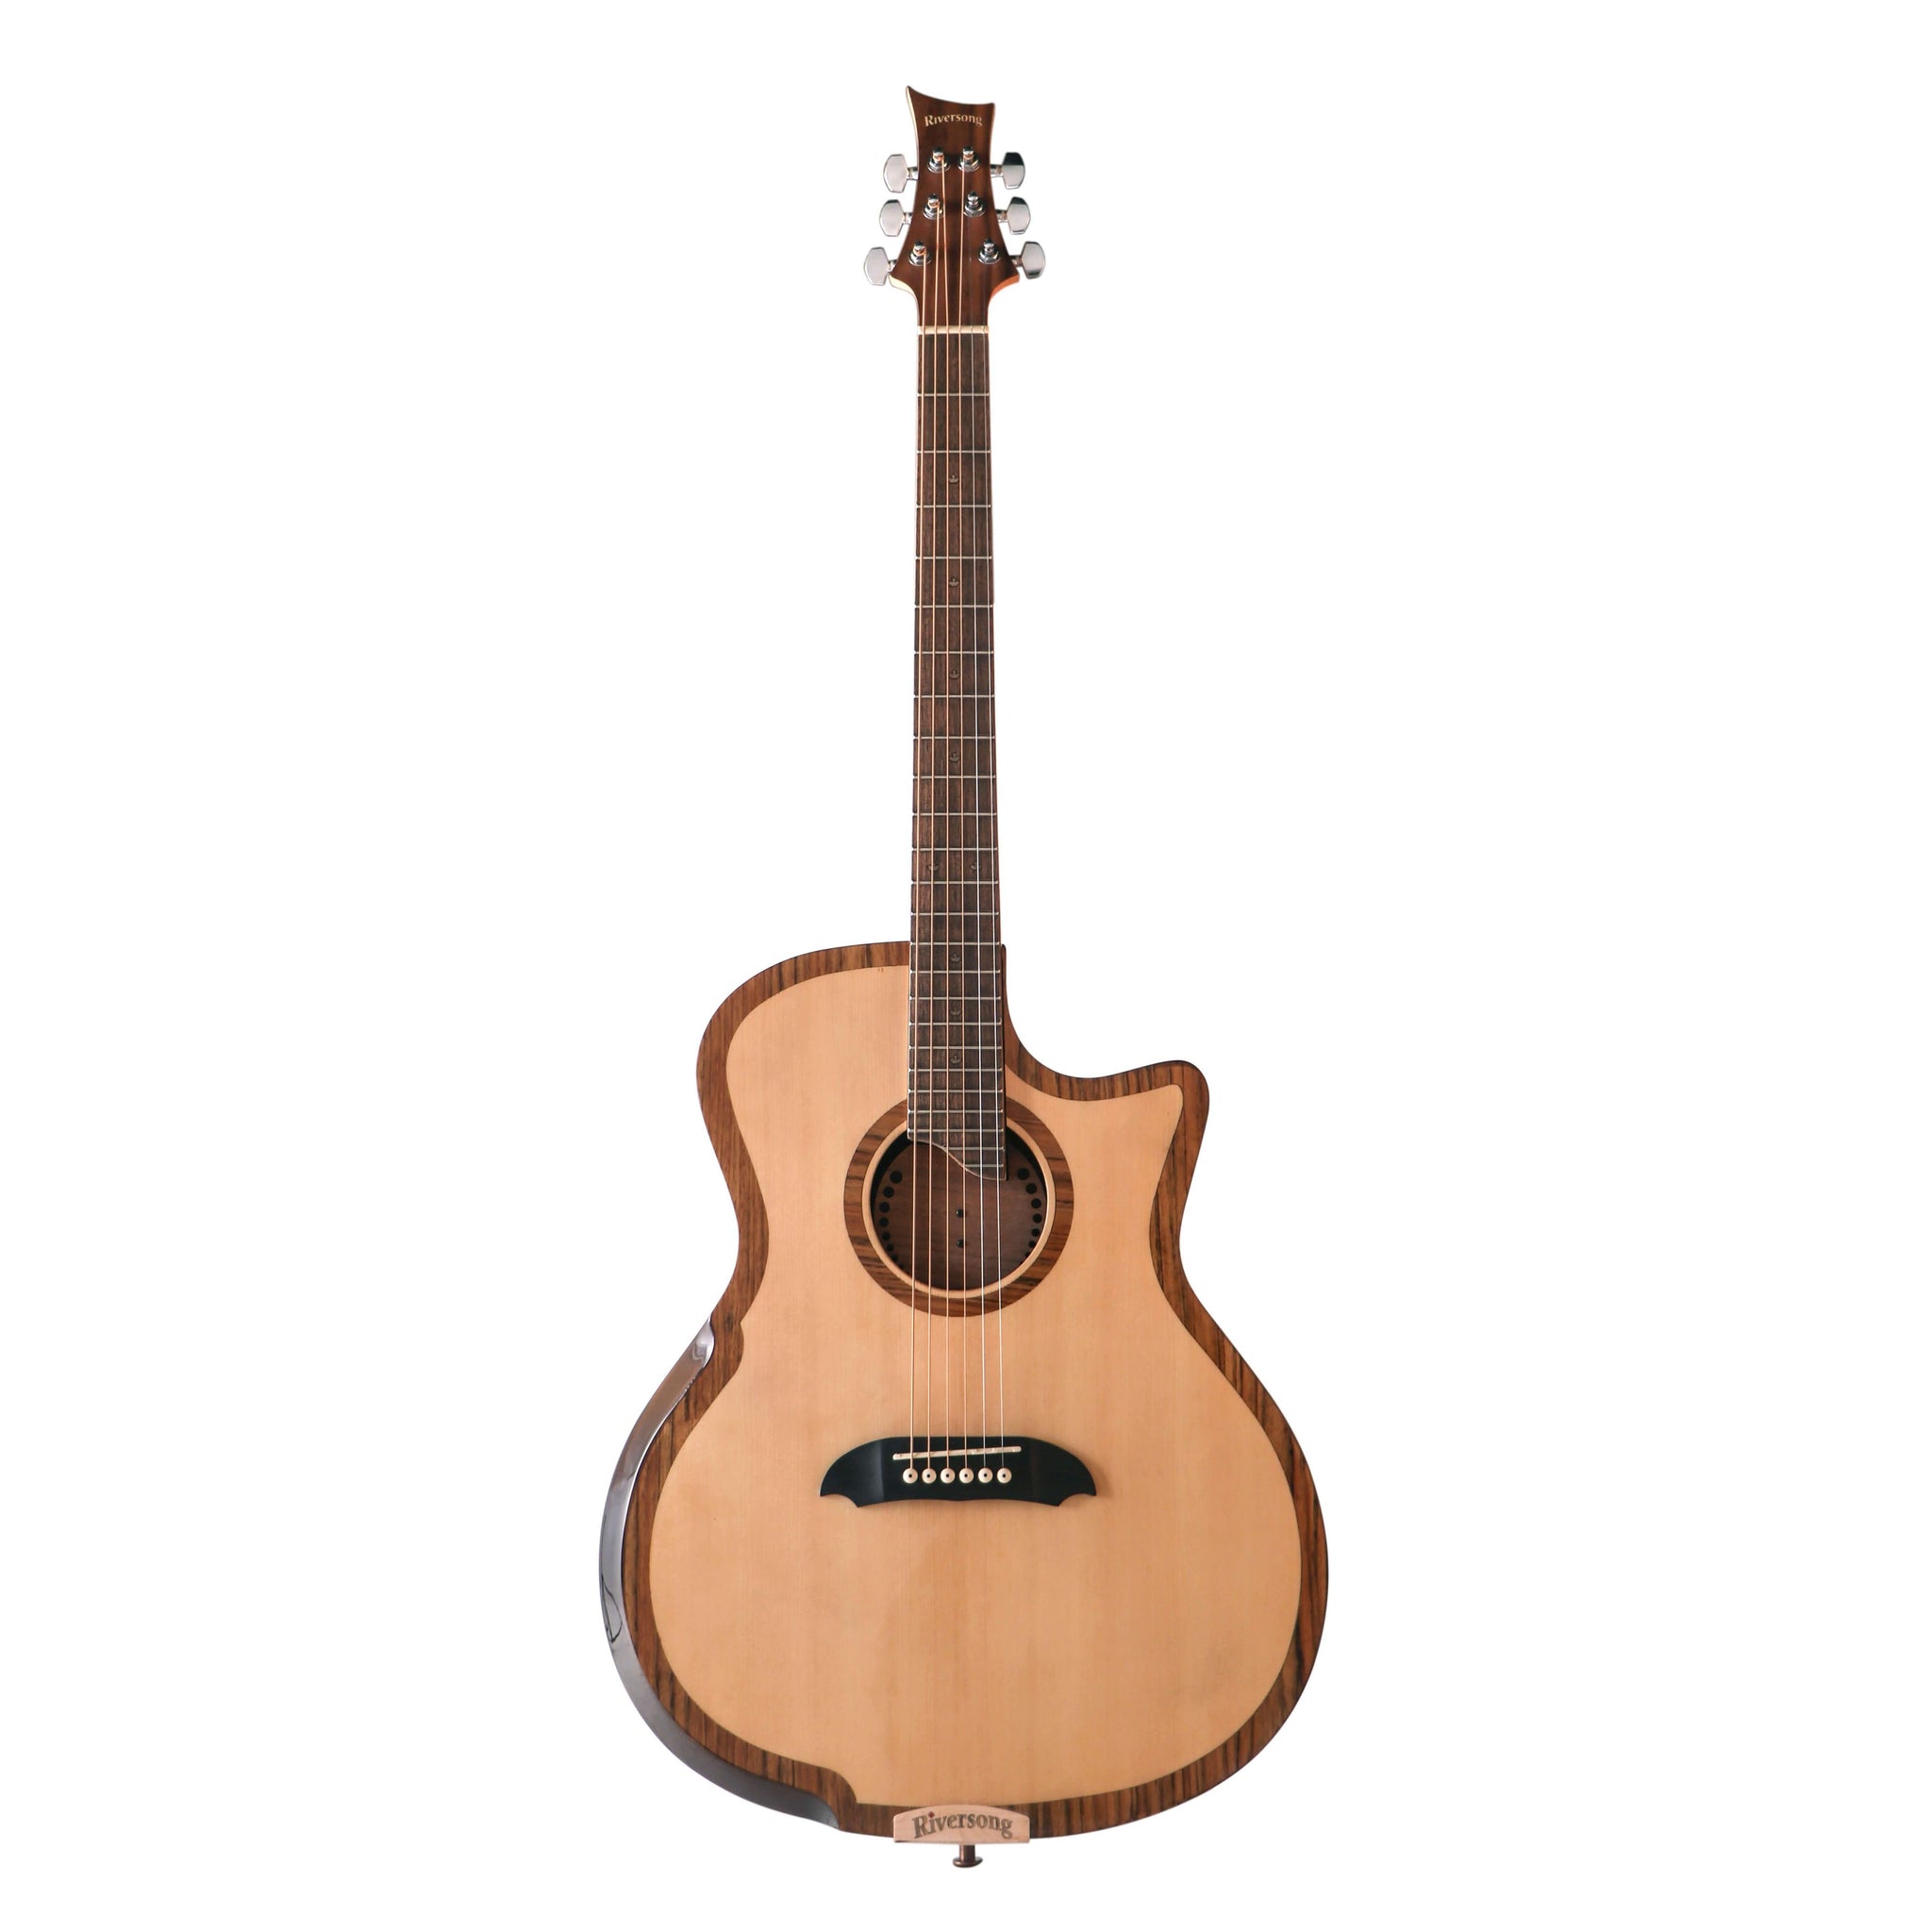 Riversong P-2P-GA Pacific Series Tradition Acoustic/Electric Guitar-Music World Academy